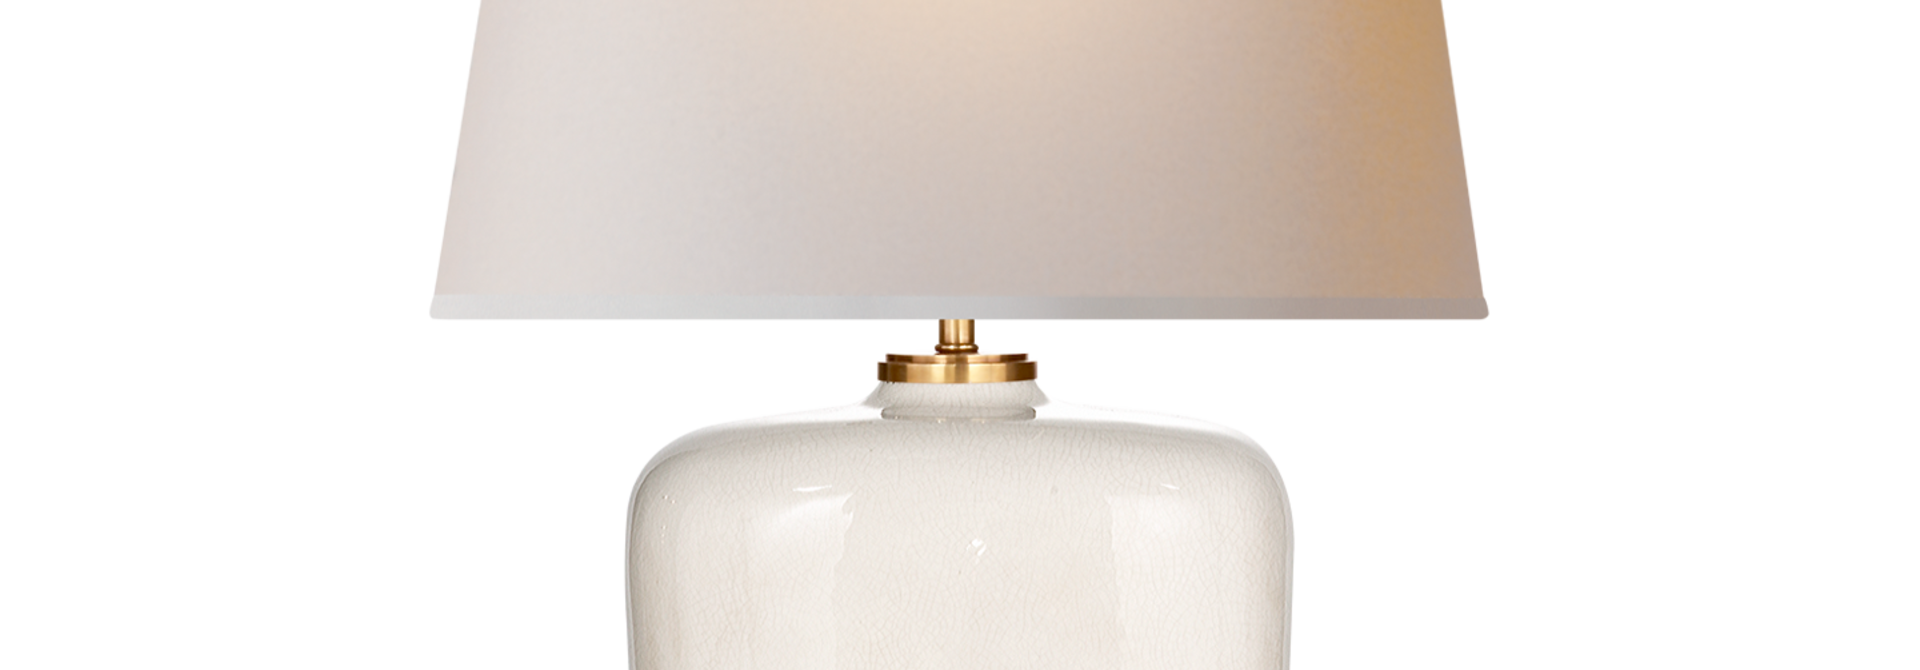 Mimi | The Table Lamp Collection, Tea Stain - 16.5 Inch x 16.5 Inch x 27.5 Inch